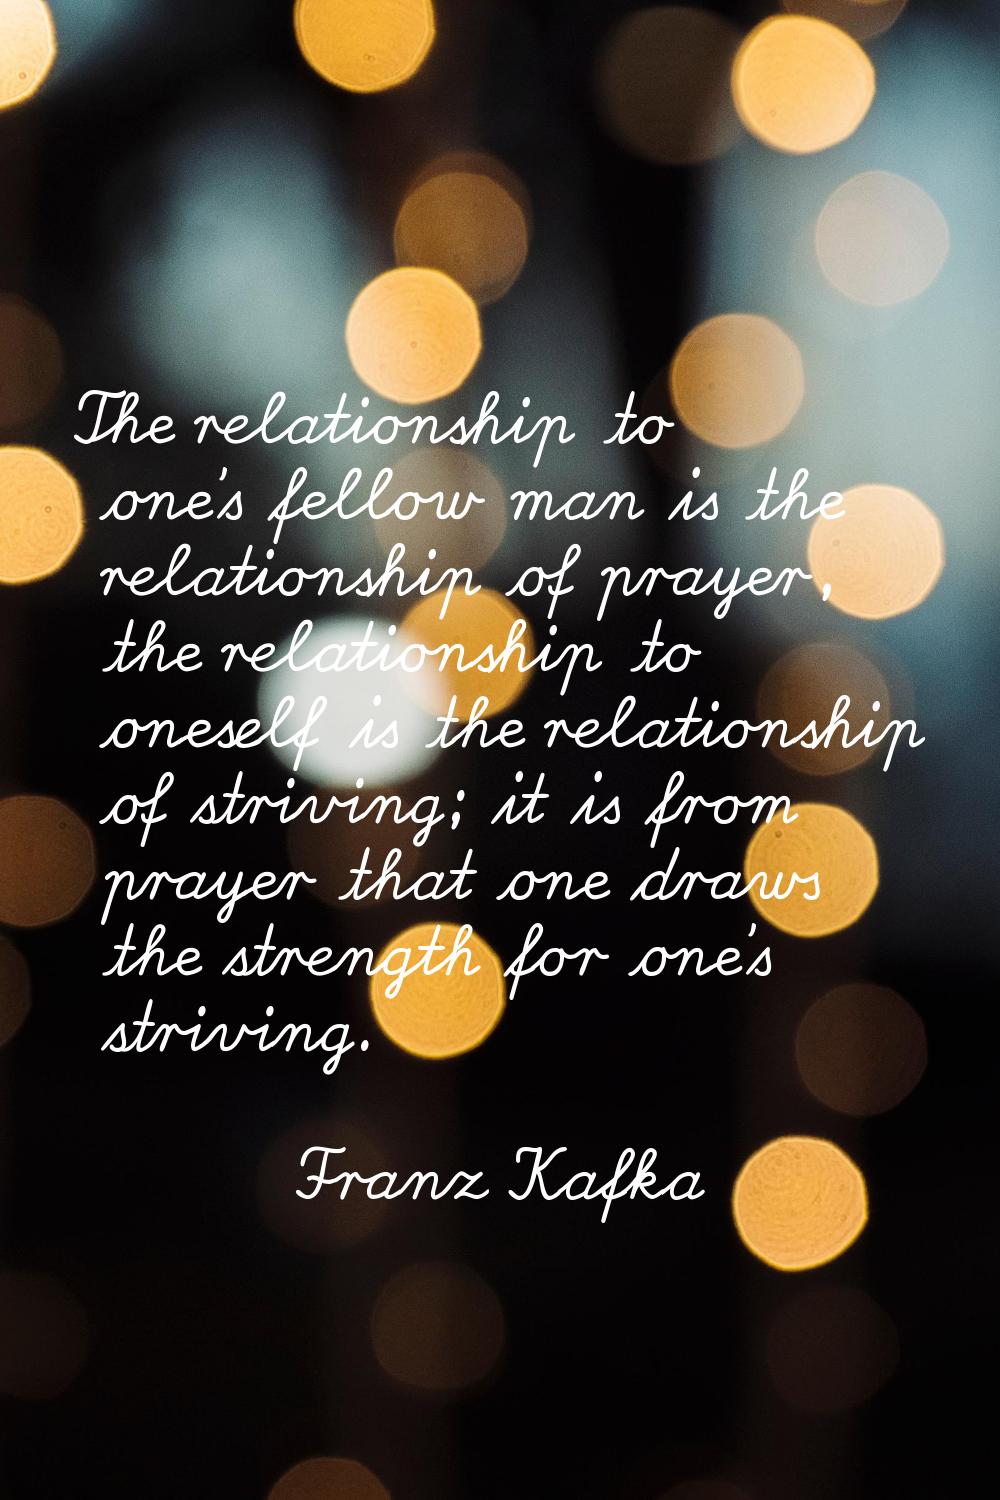 The relationship to one's fellow man is the relationship of prayer, the relationship to oneself is 